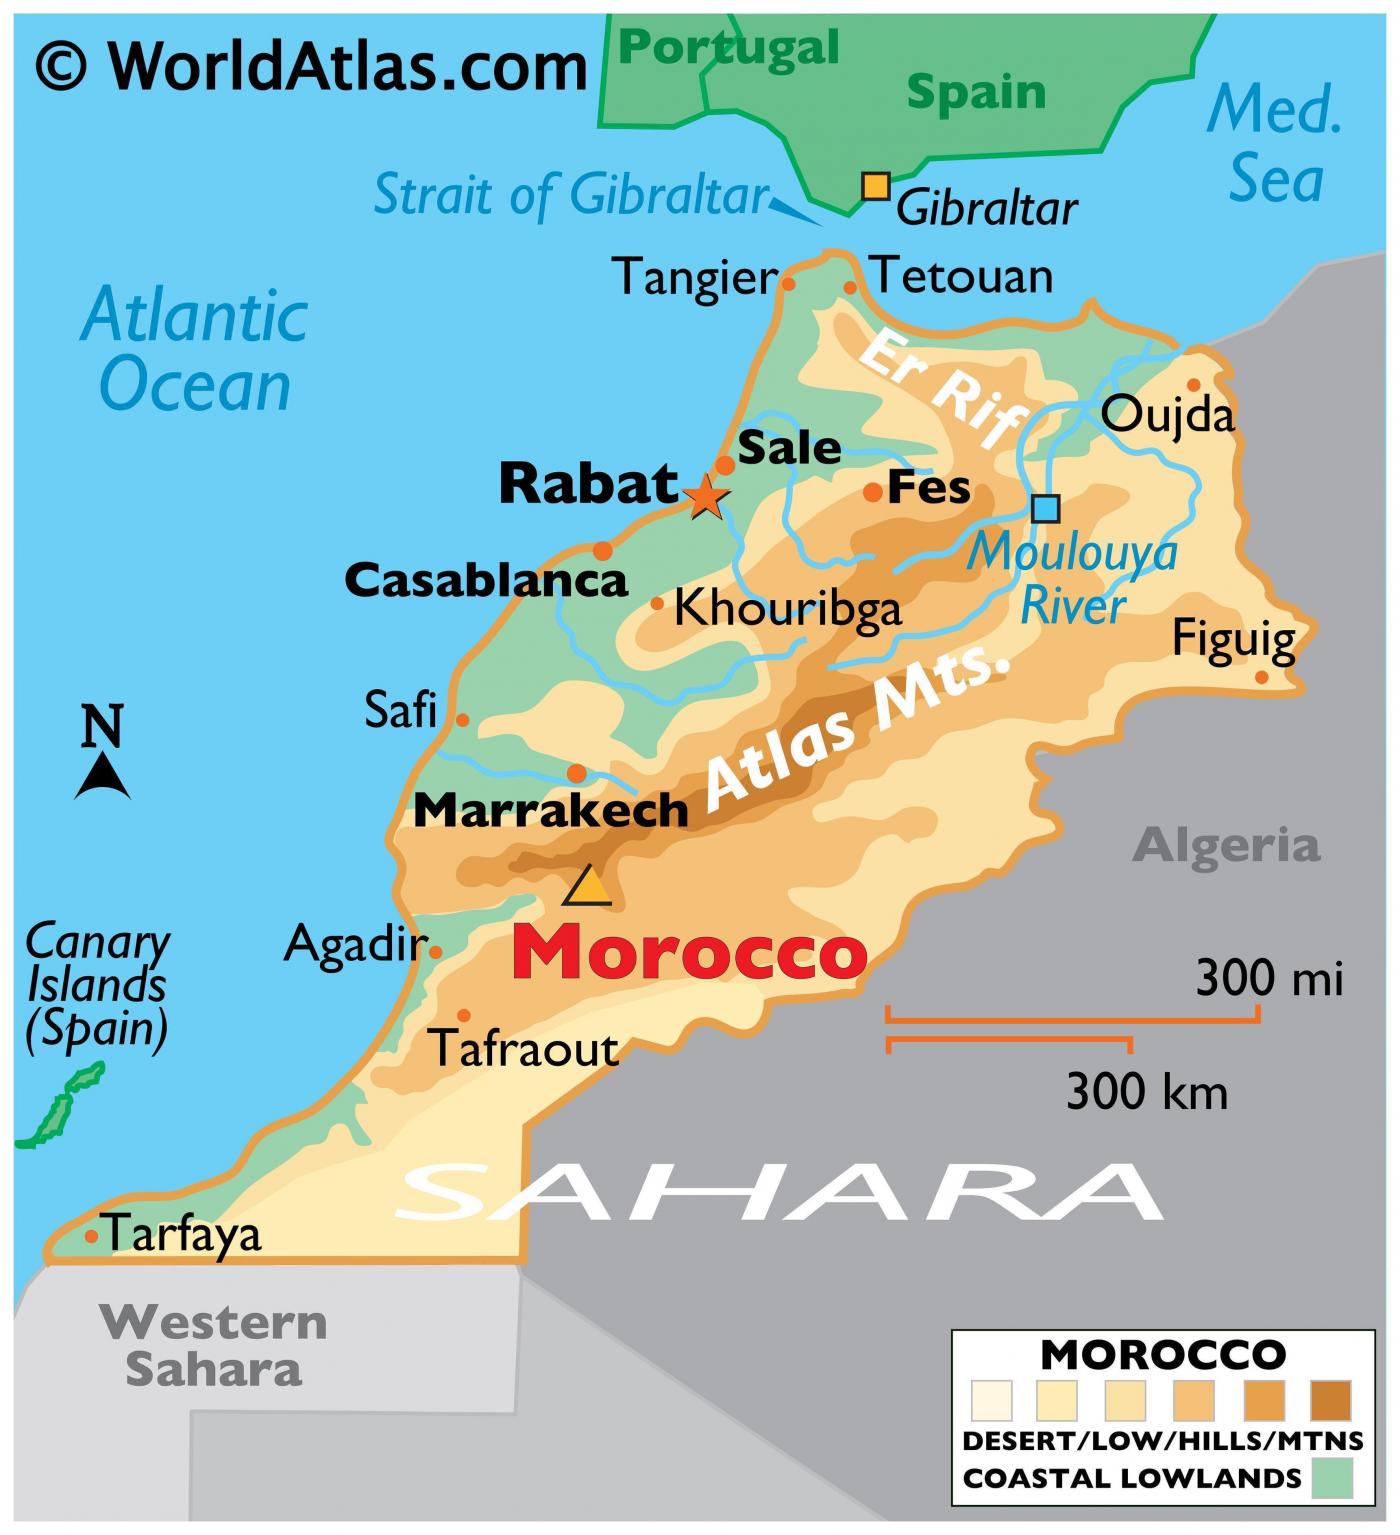 A map of Morocco, showing the different regions of the country